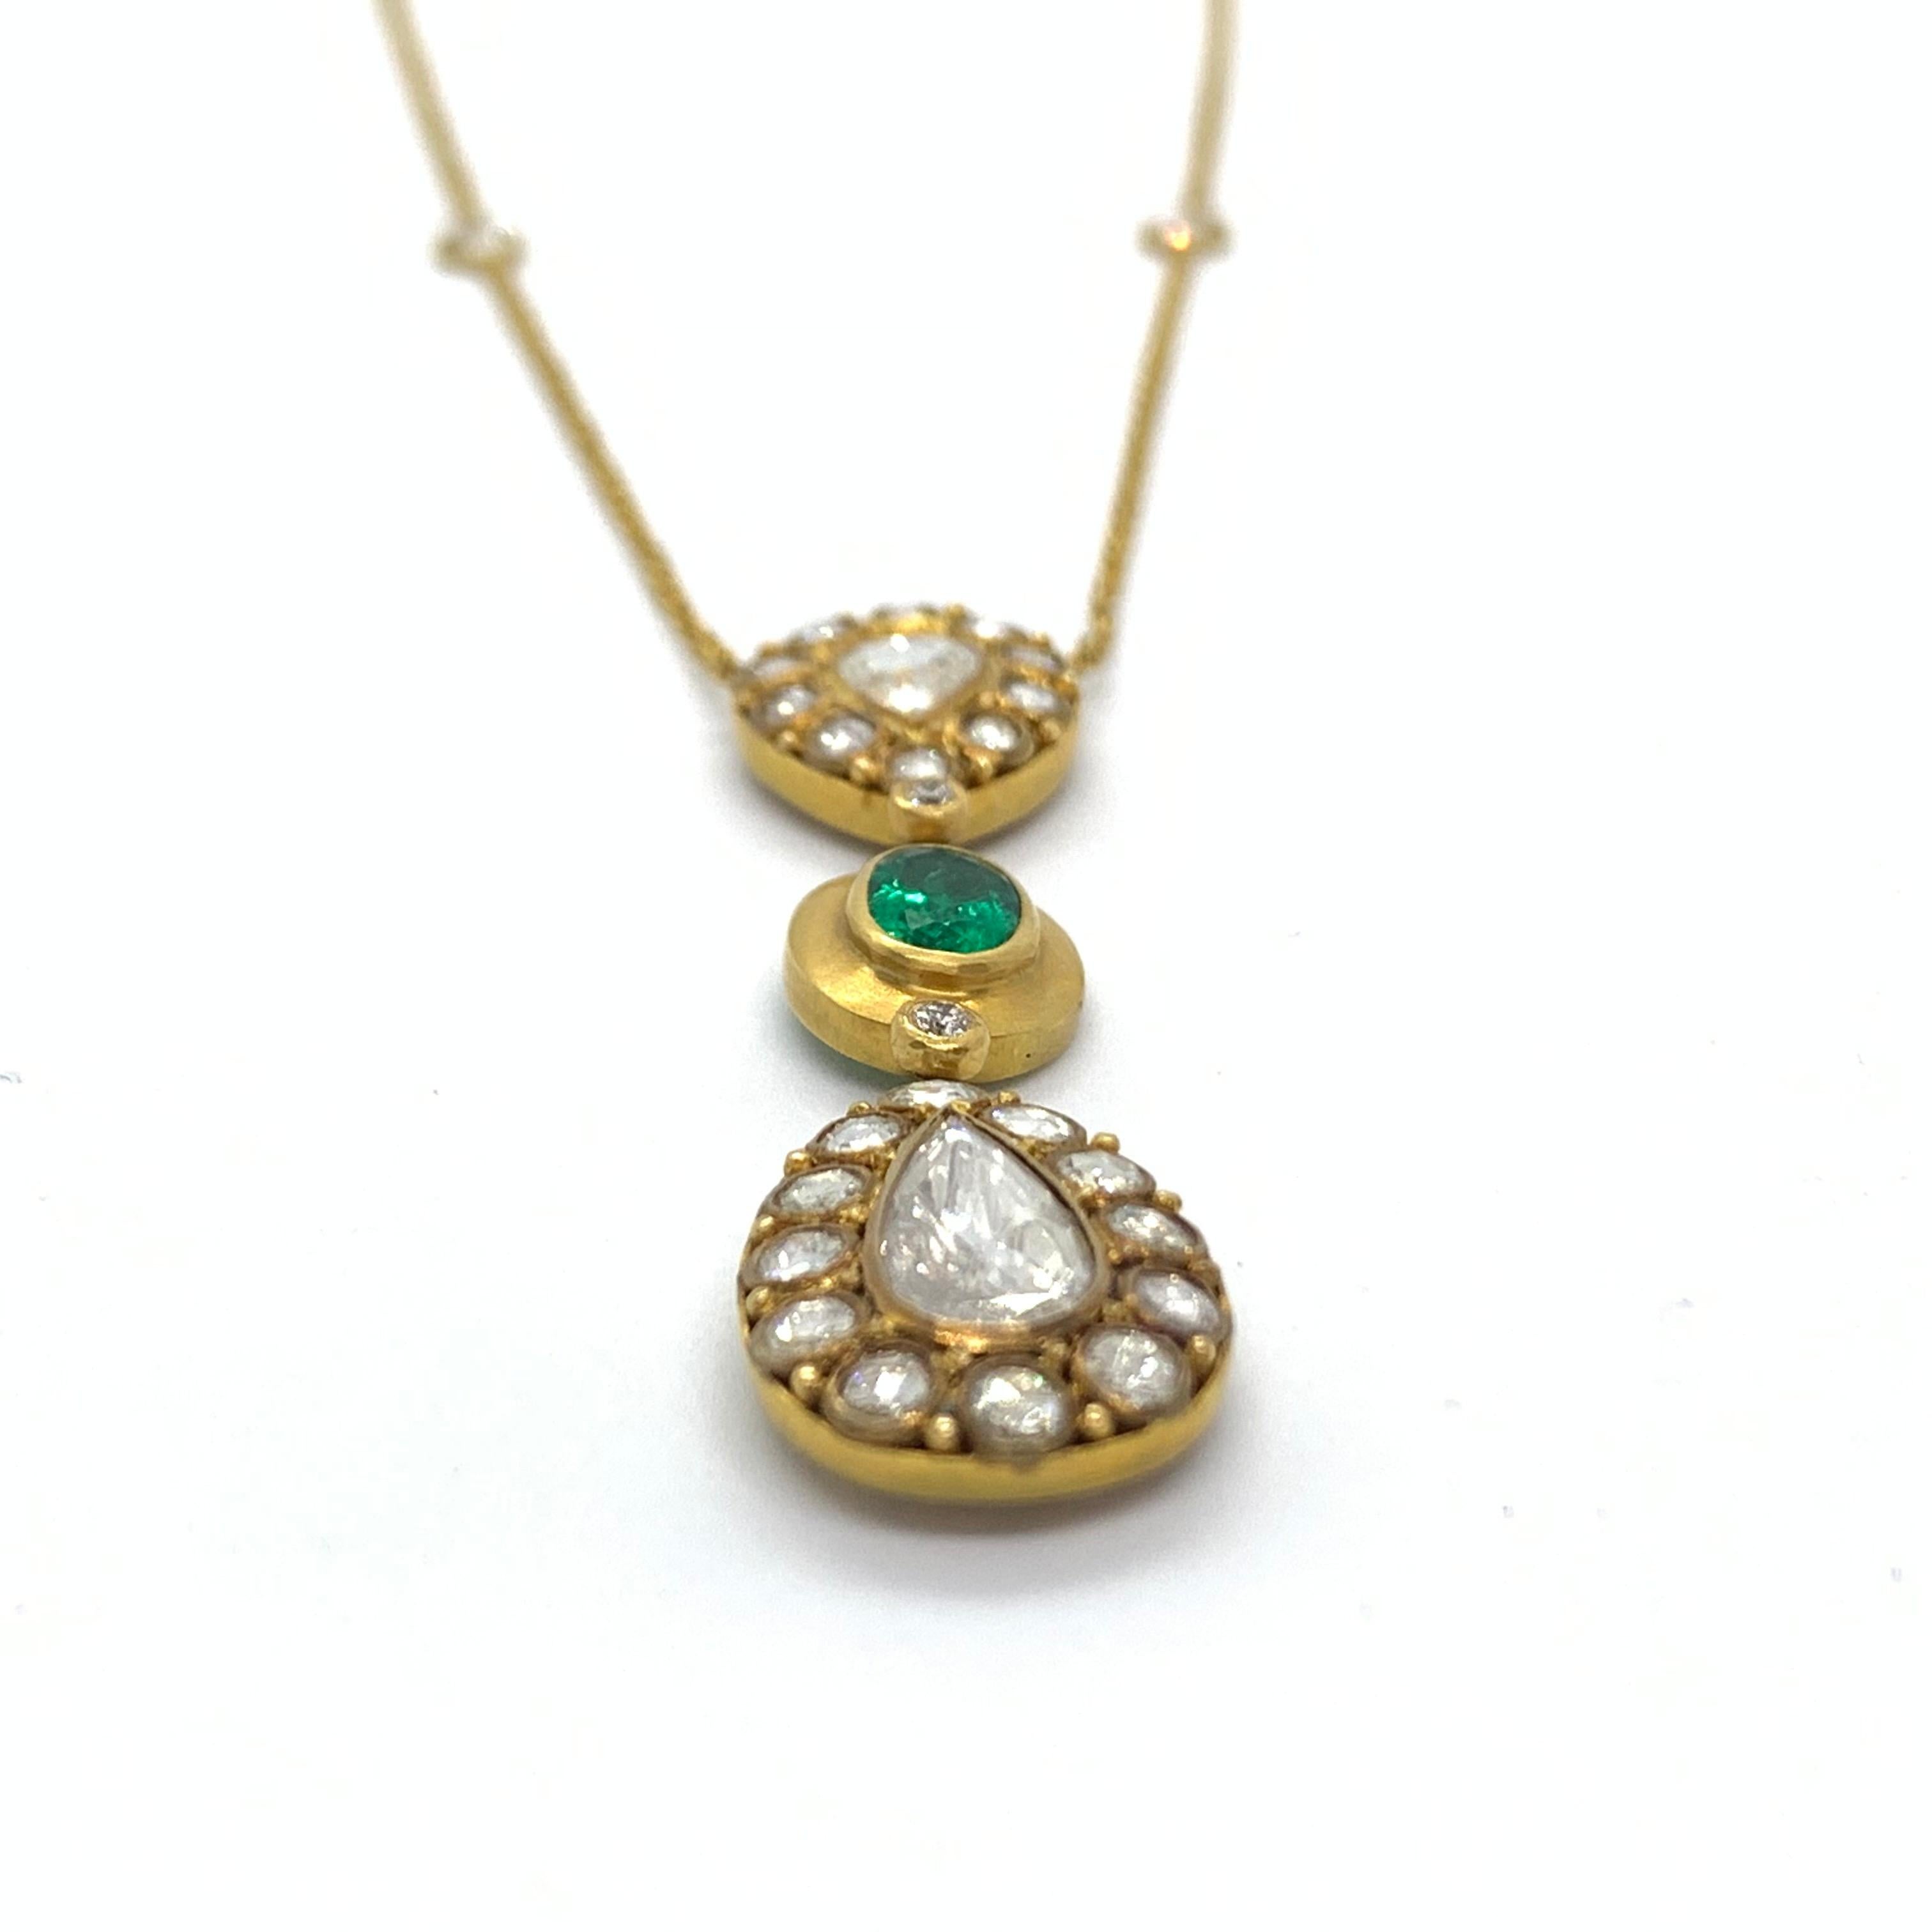 Necklace with 2.28 Carats Diamonds and Emeralds Handcrafted in 18k Gold For Sale 5